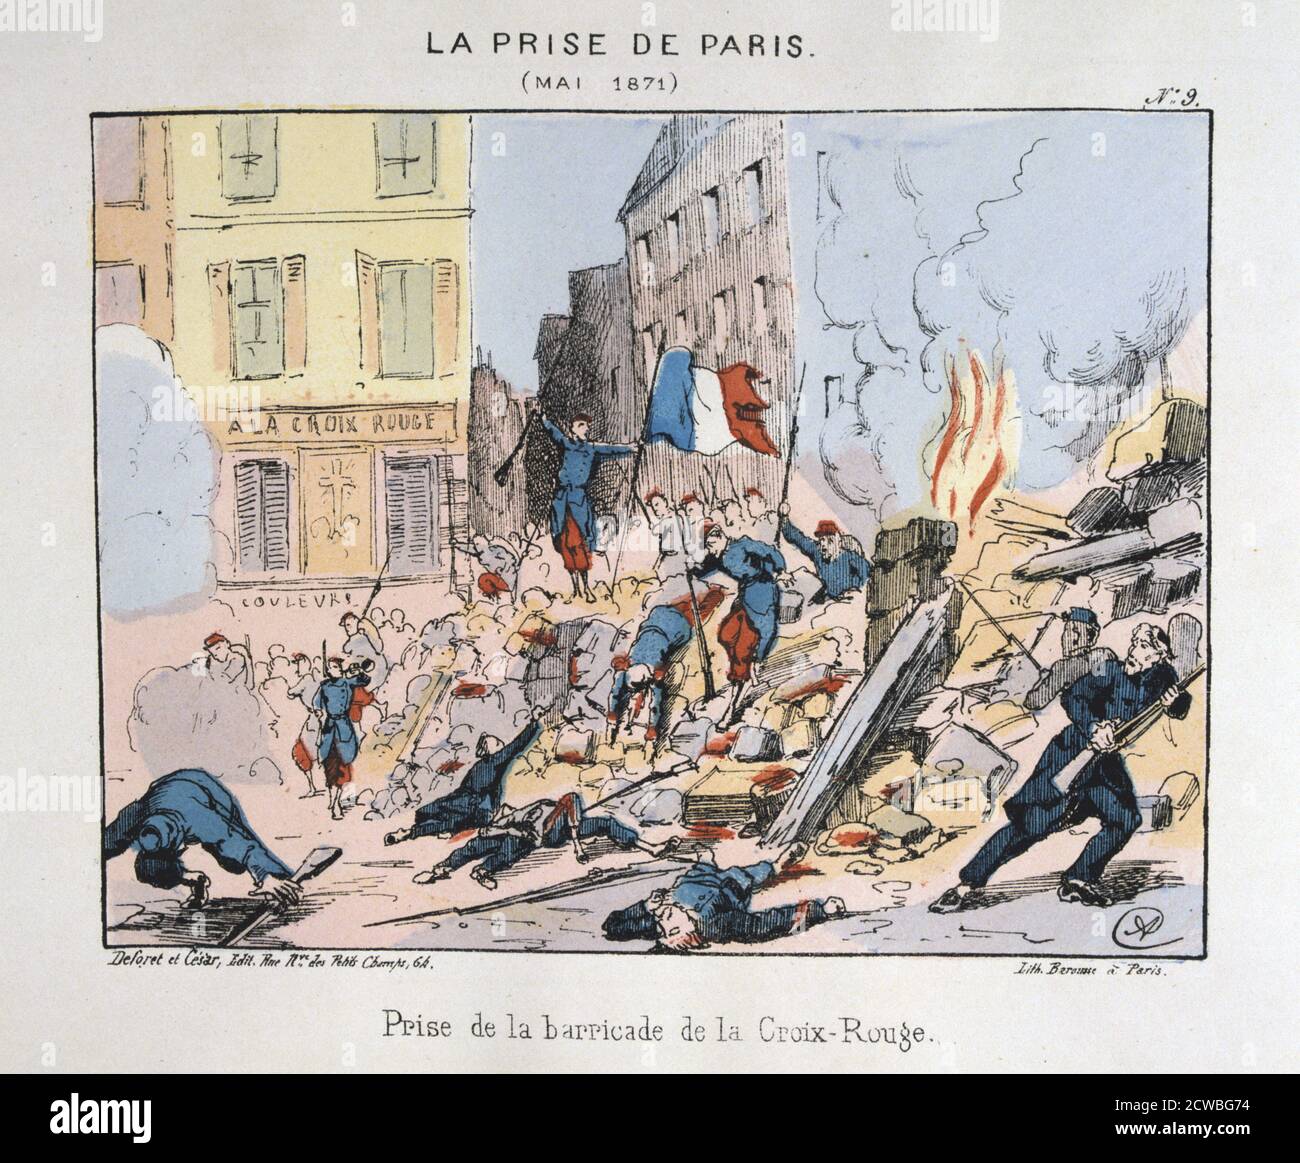 La Prise de Paris', May 1871. French government troops capturing the barricade of la Croix-Rouge from the Paris Communards. From a private collection. Stock Photo